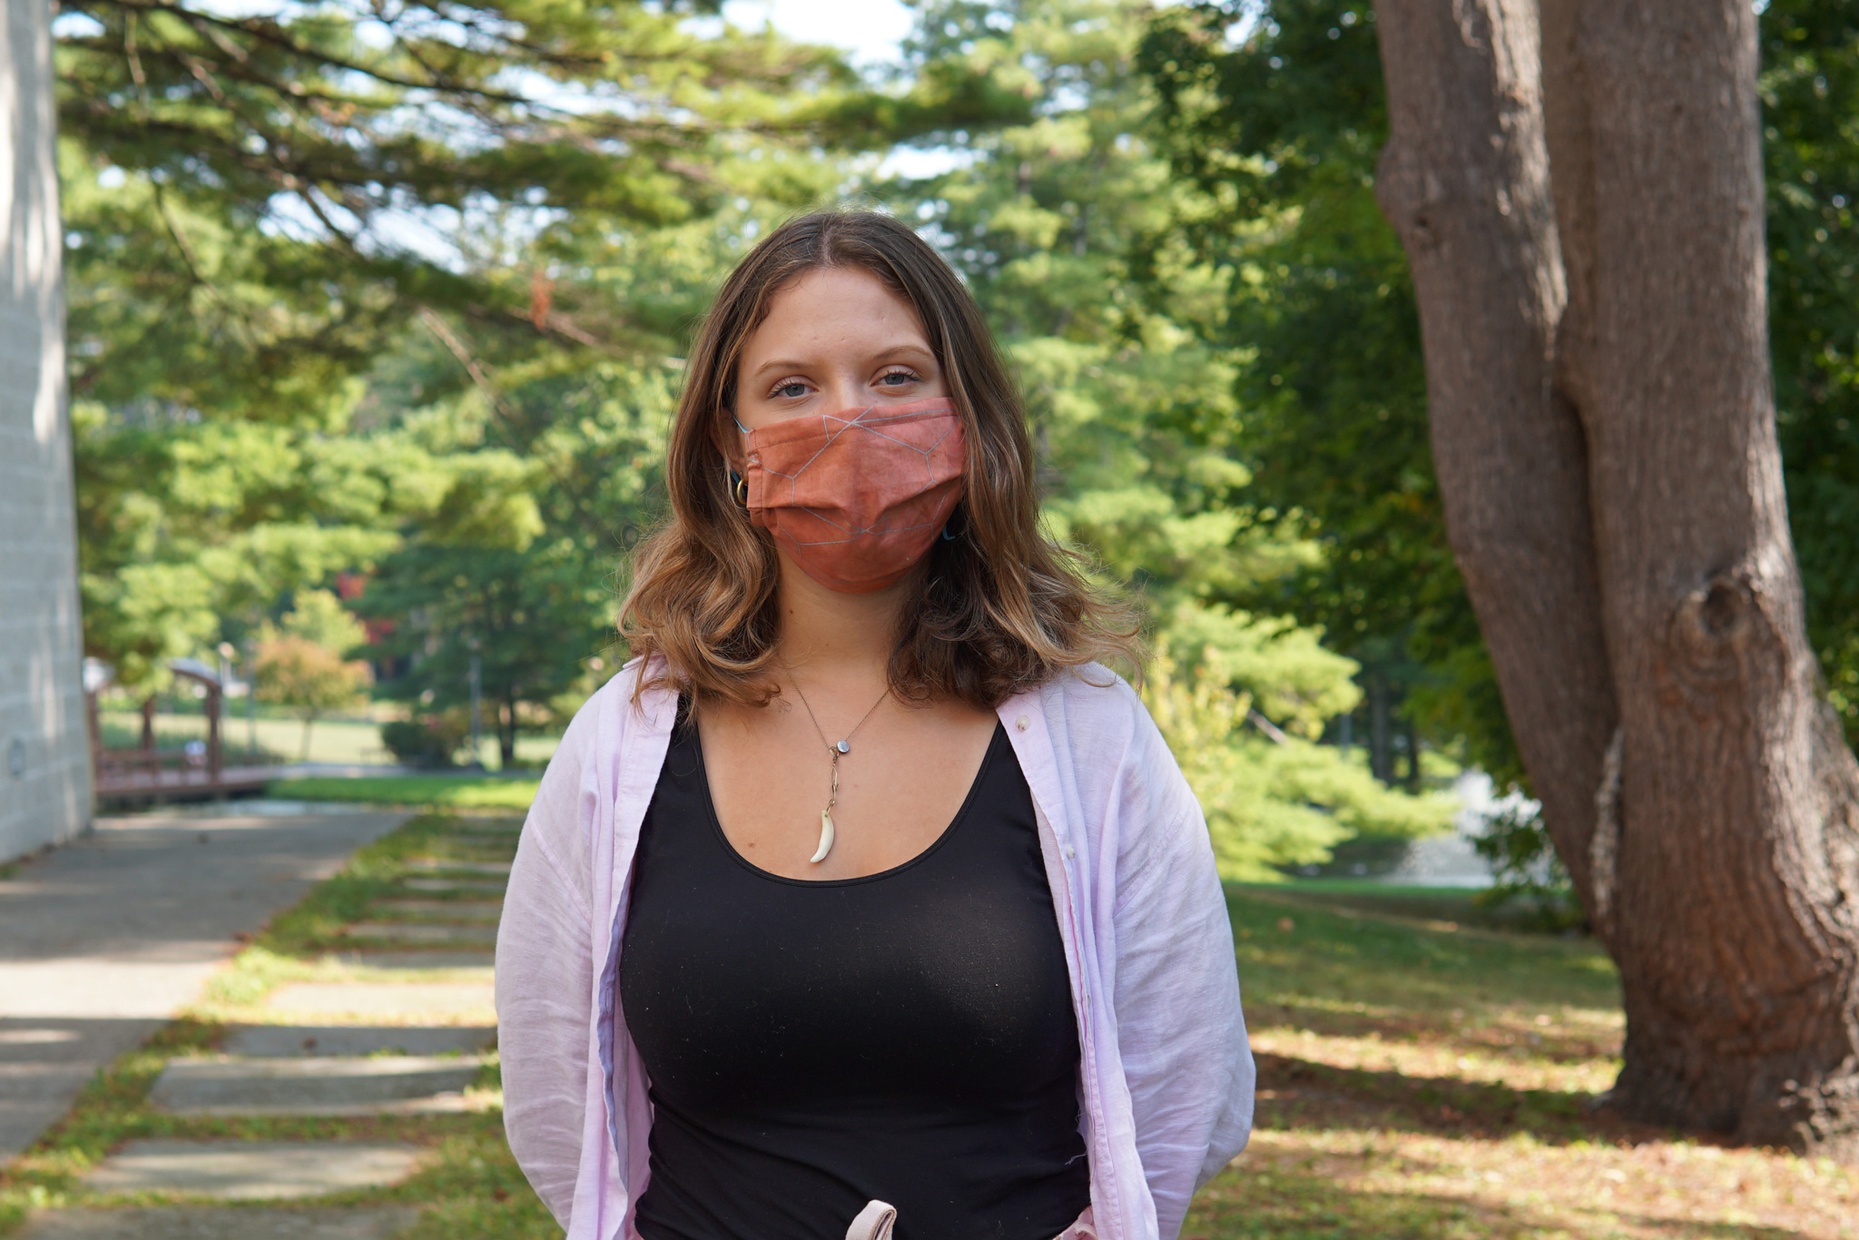 A light-skinned, young female wears a red mask with gray patterns printed on it standing in front of trees.